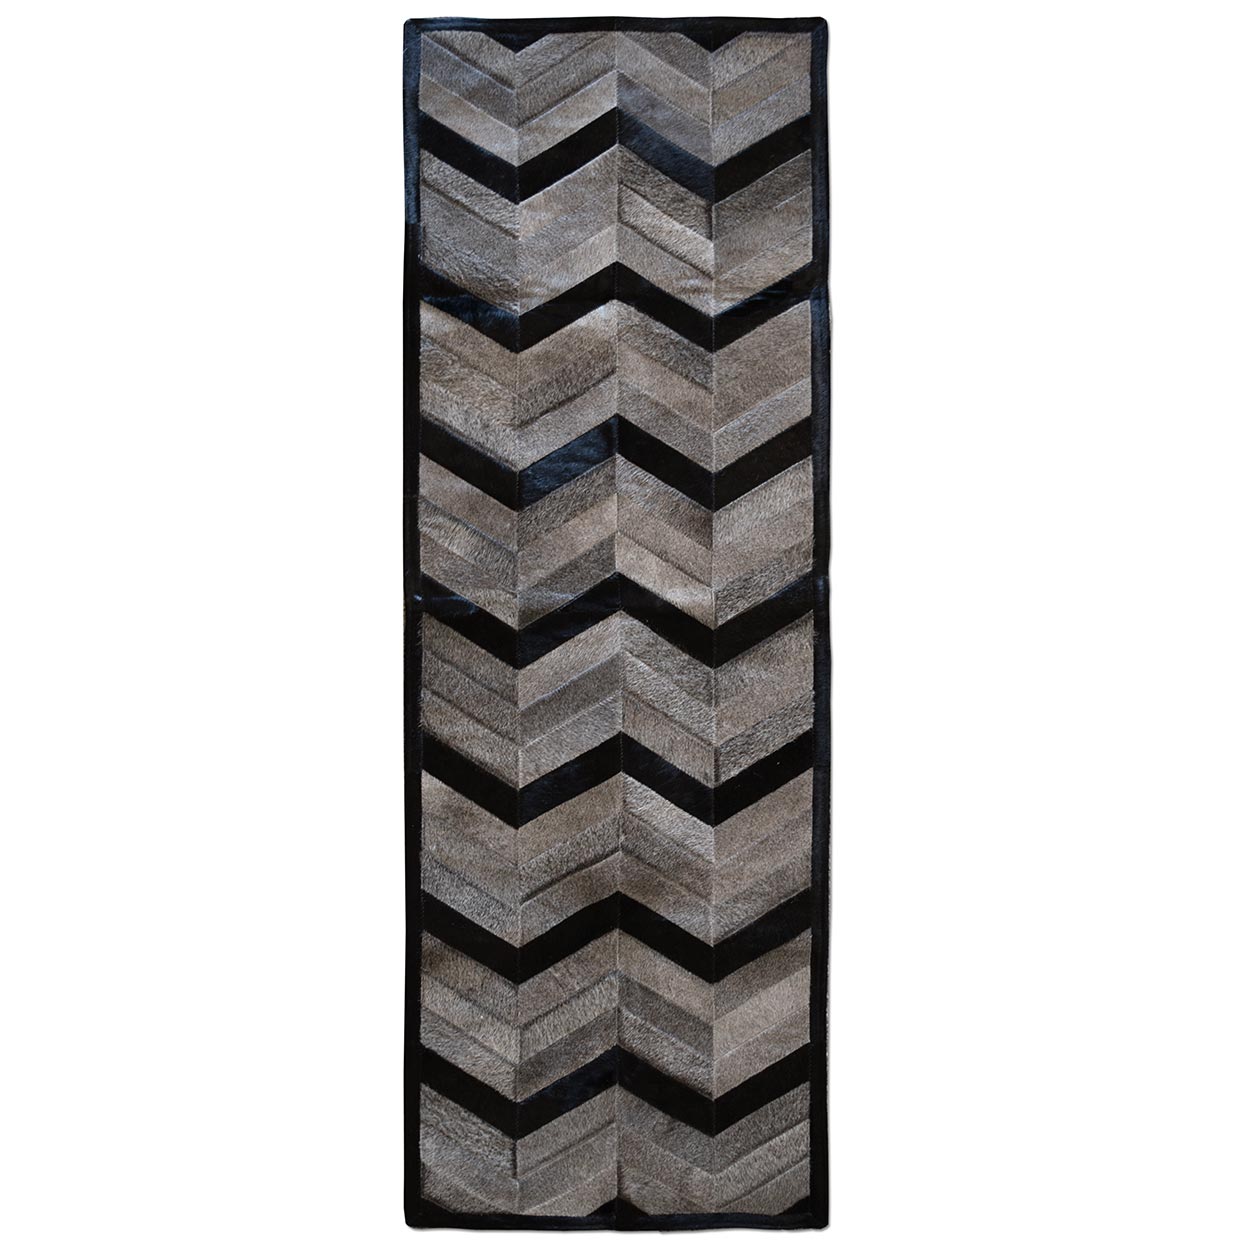 323176R - 71in x 24in Cowhide Patchwork Runner - Black And Gray Chevrons